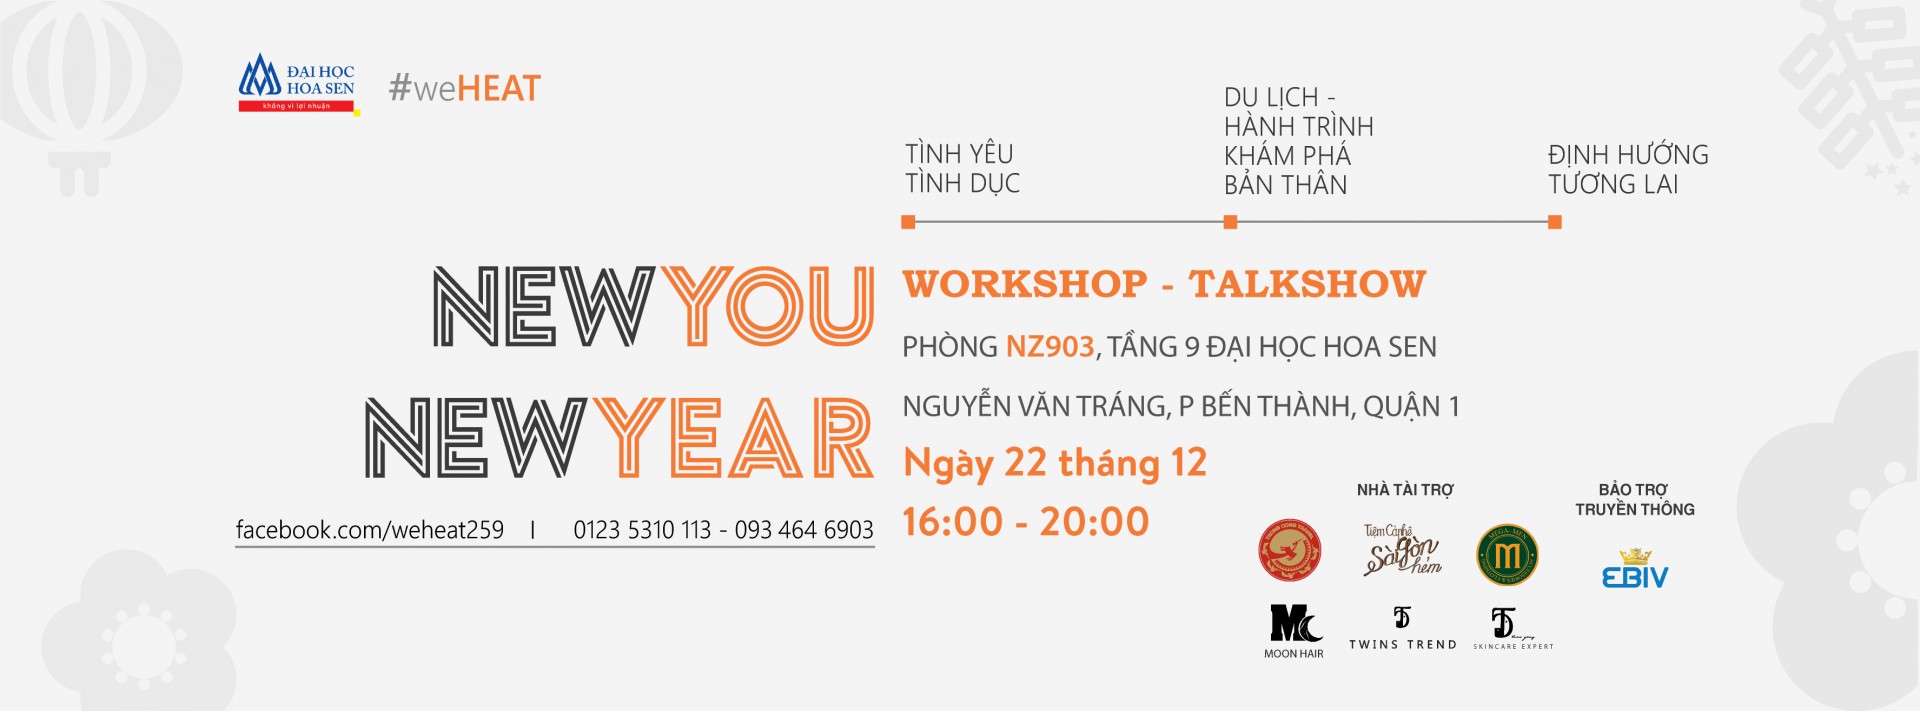 WORKSHOP – TALKSHOW “NEW YOU FOR NEW YEAR”